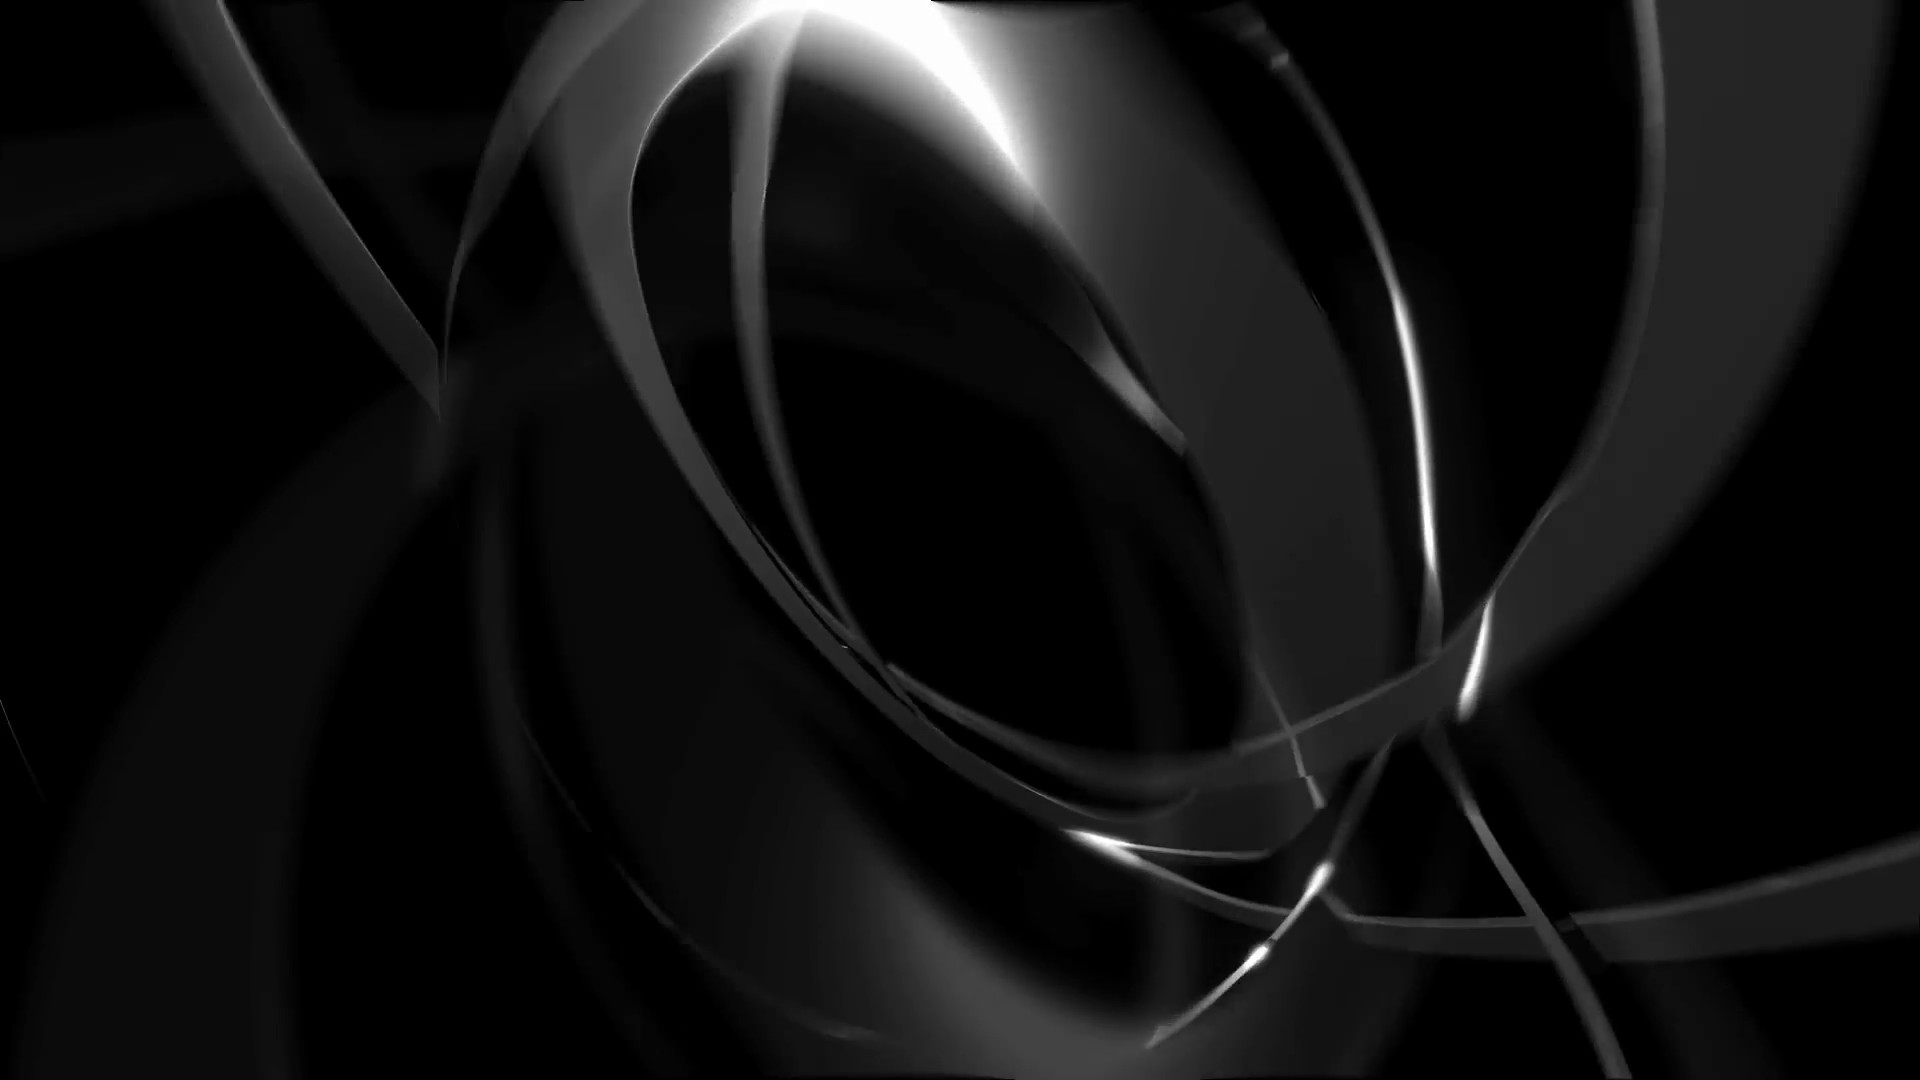 1920x1080 Looping Animation of Chrome Rings on a Black Background Motion Background -  VideoBlocks